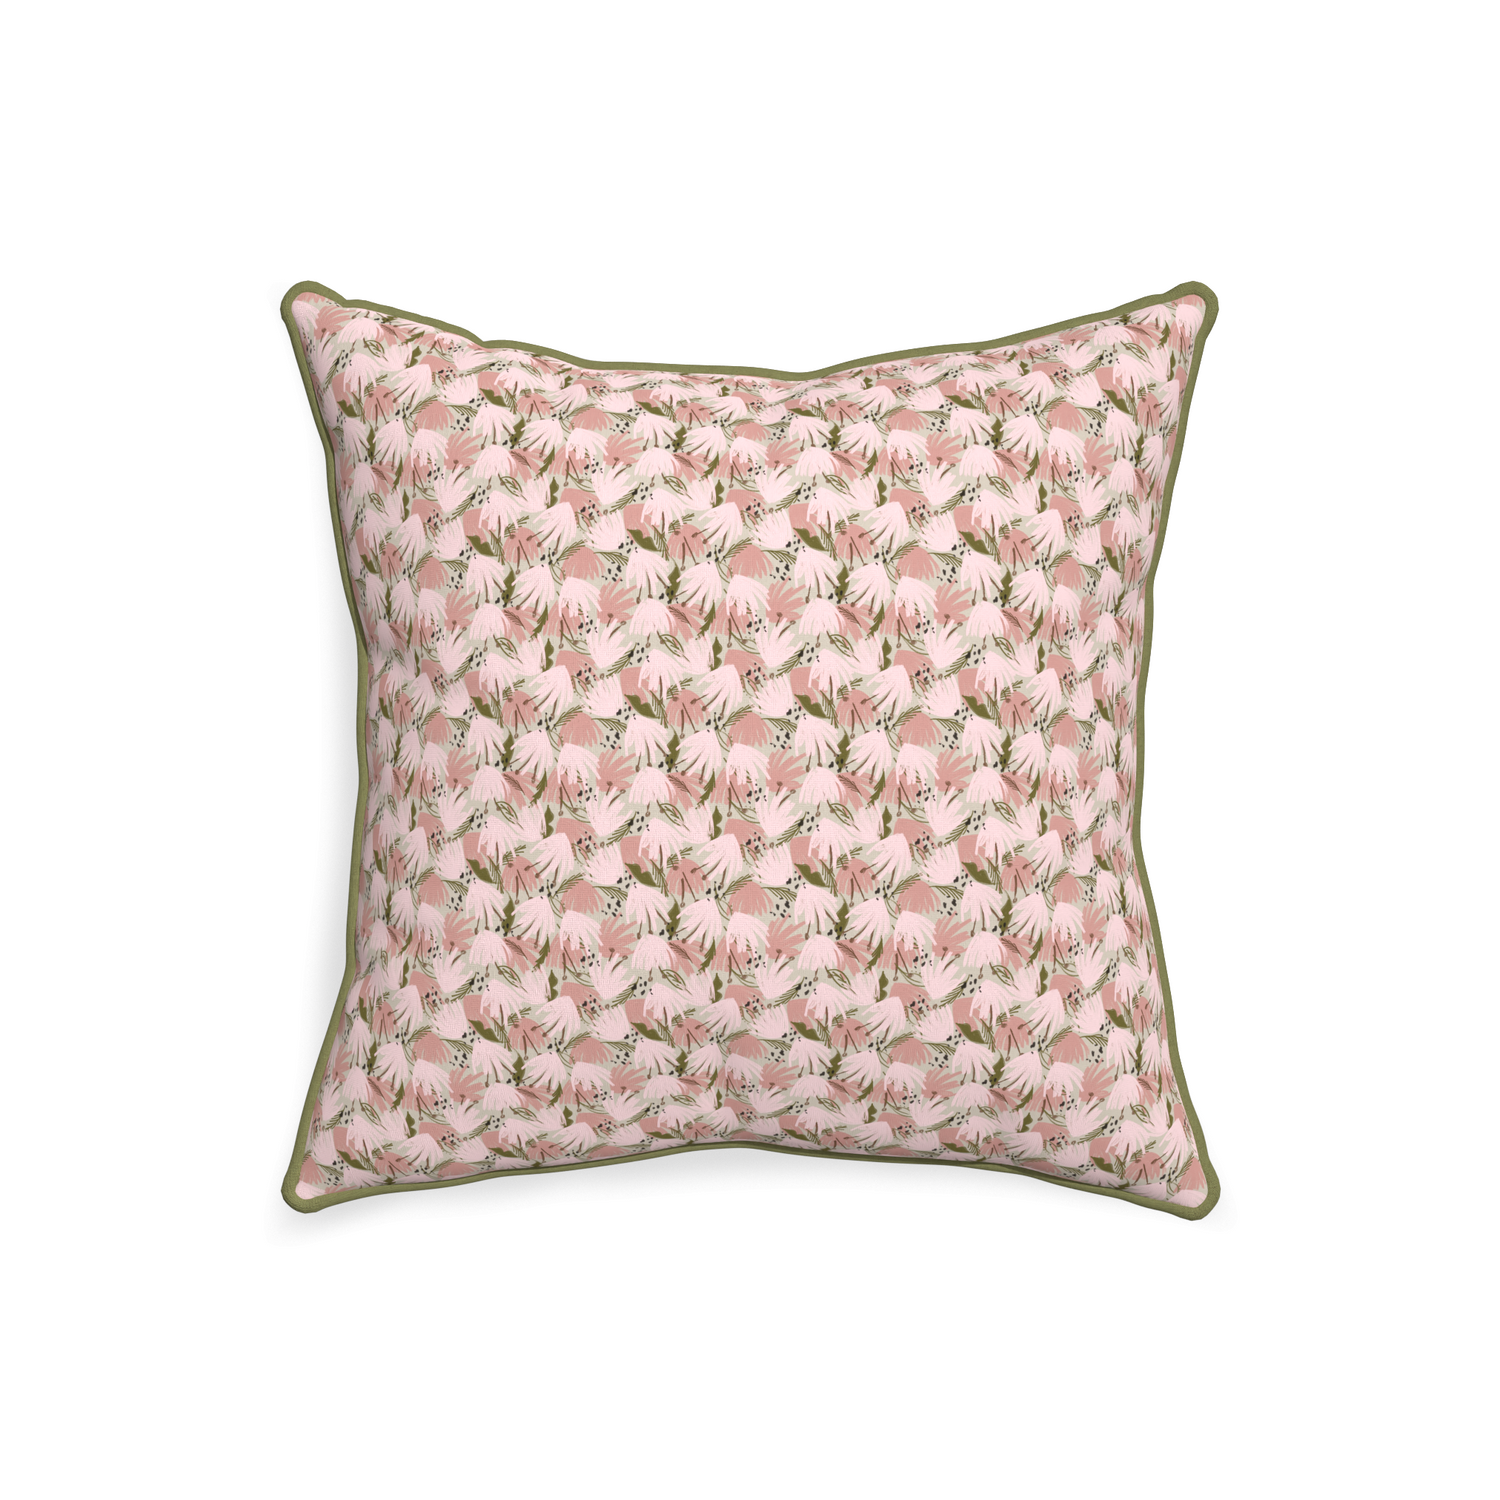 20-square eden pink custom pink floralpillow with moss piping on white background